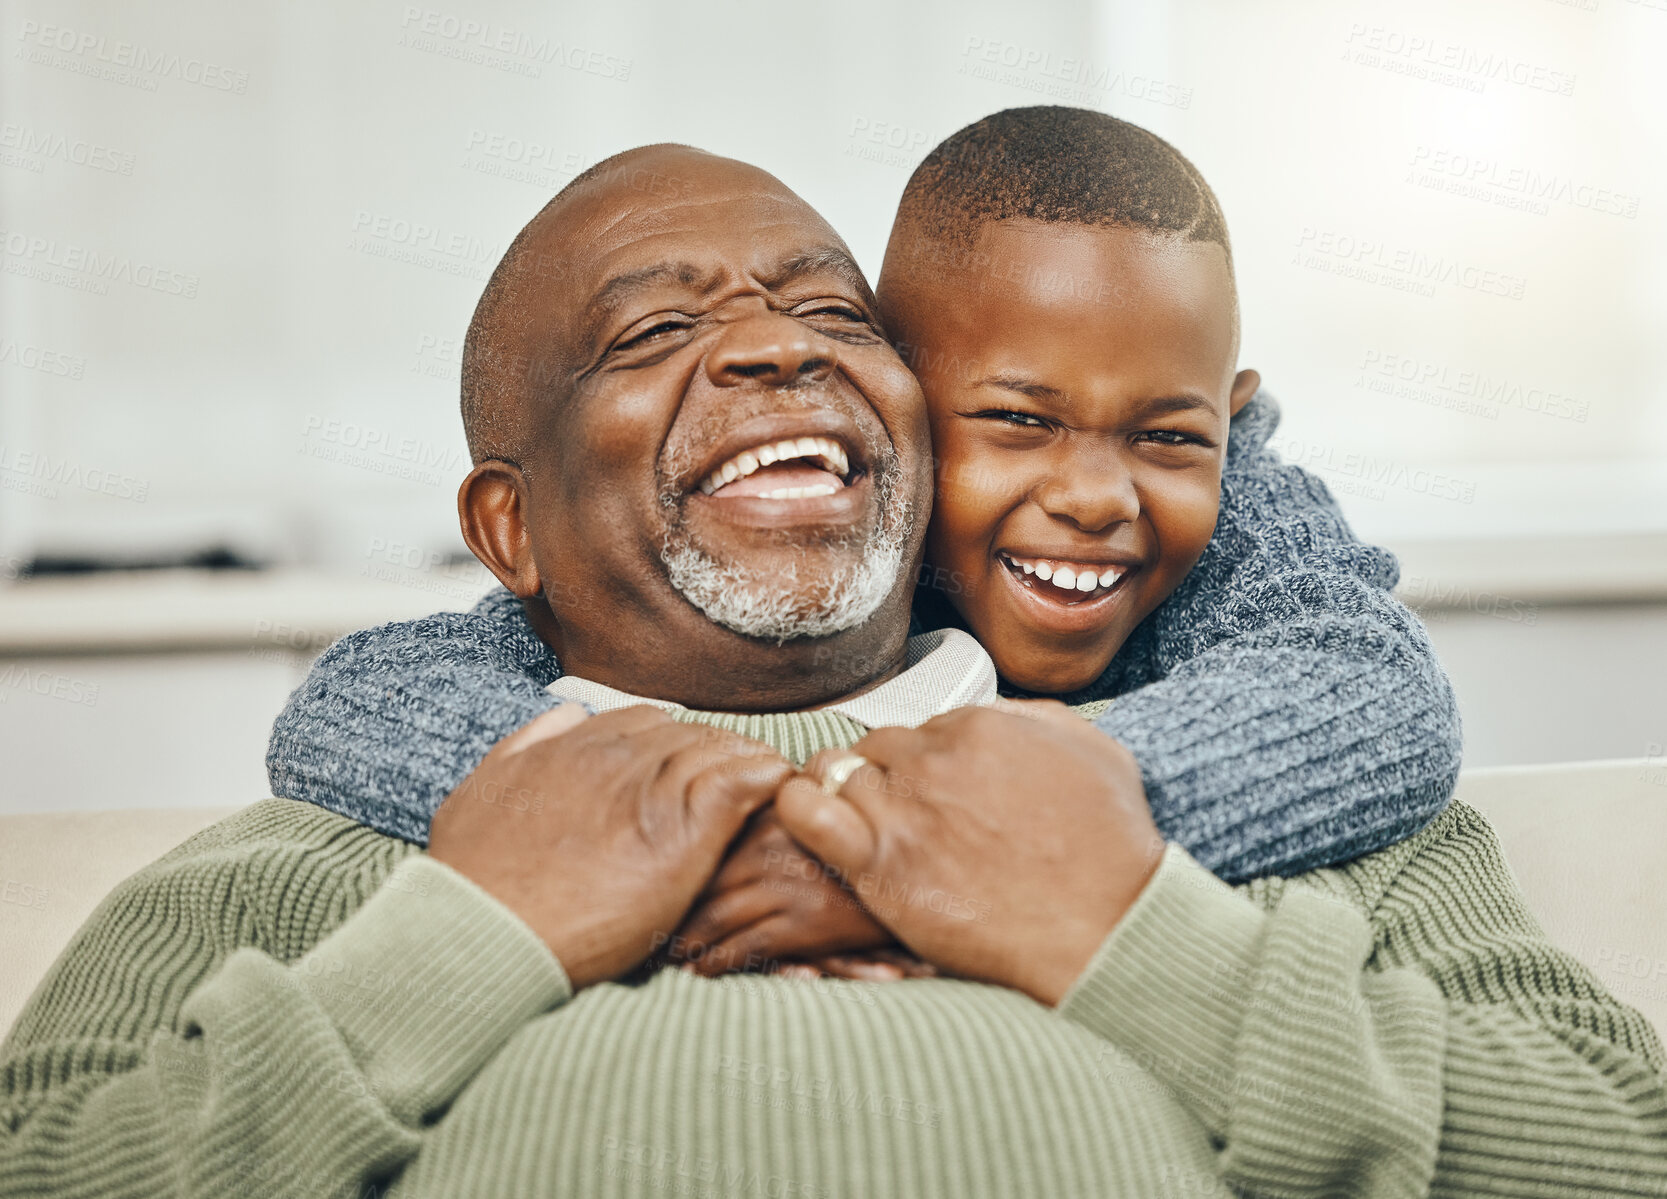 Buy stock photo Shot of a grandfather bonding with his young grandson on a sofa at home